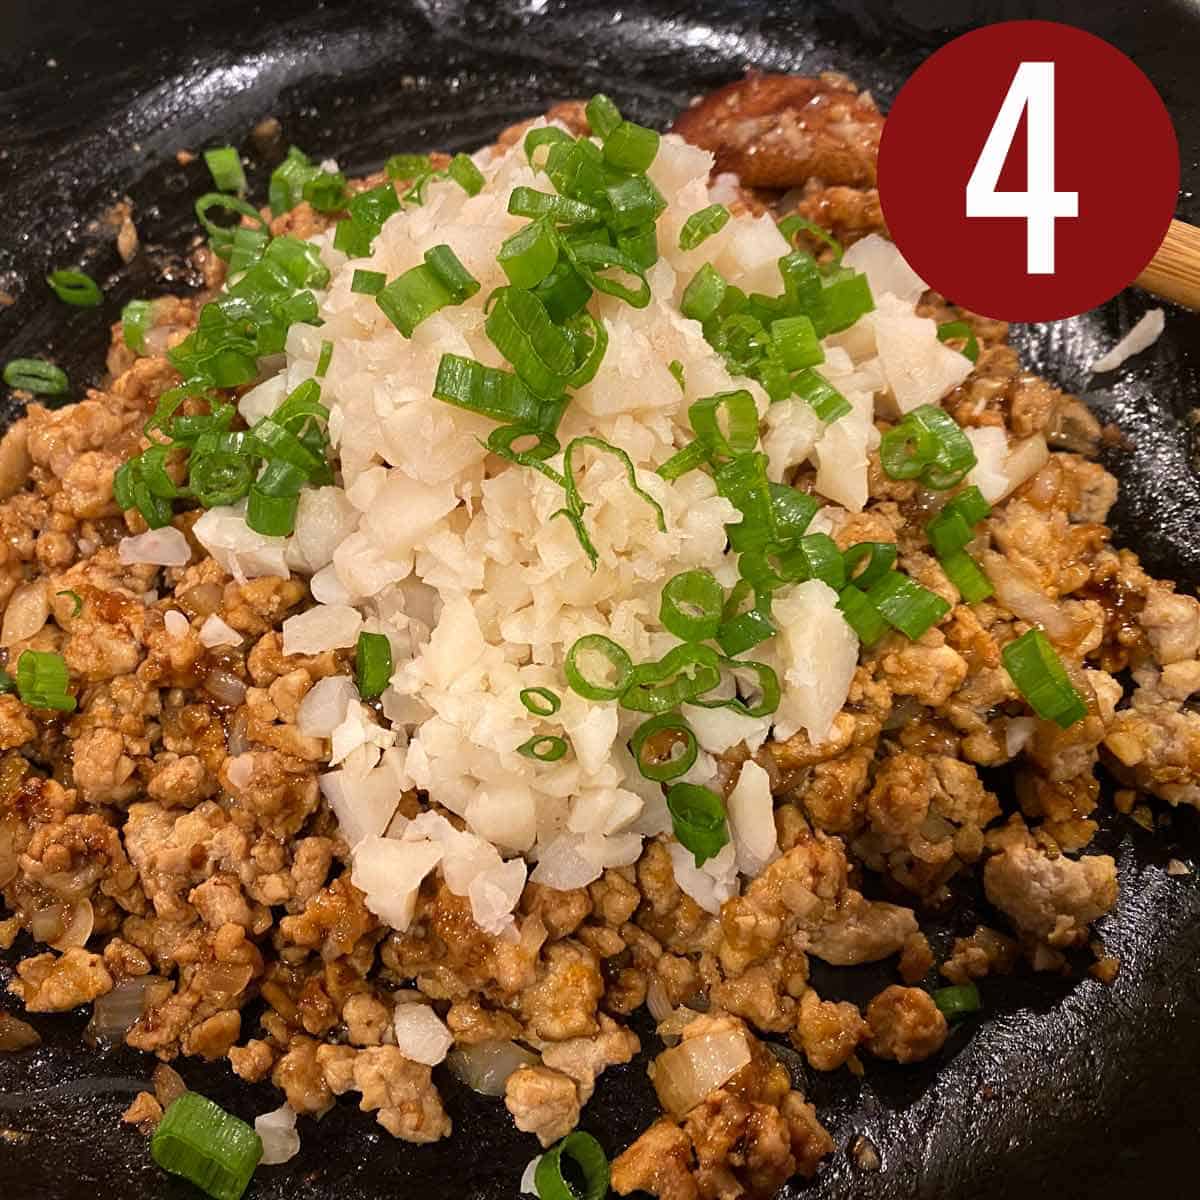 Ground chicken with water chestnuts and sliced gree onions on a black skillet.